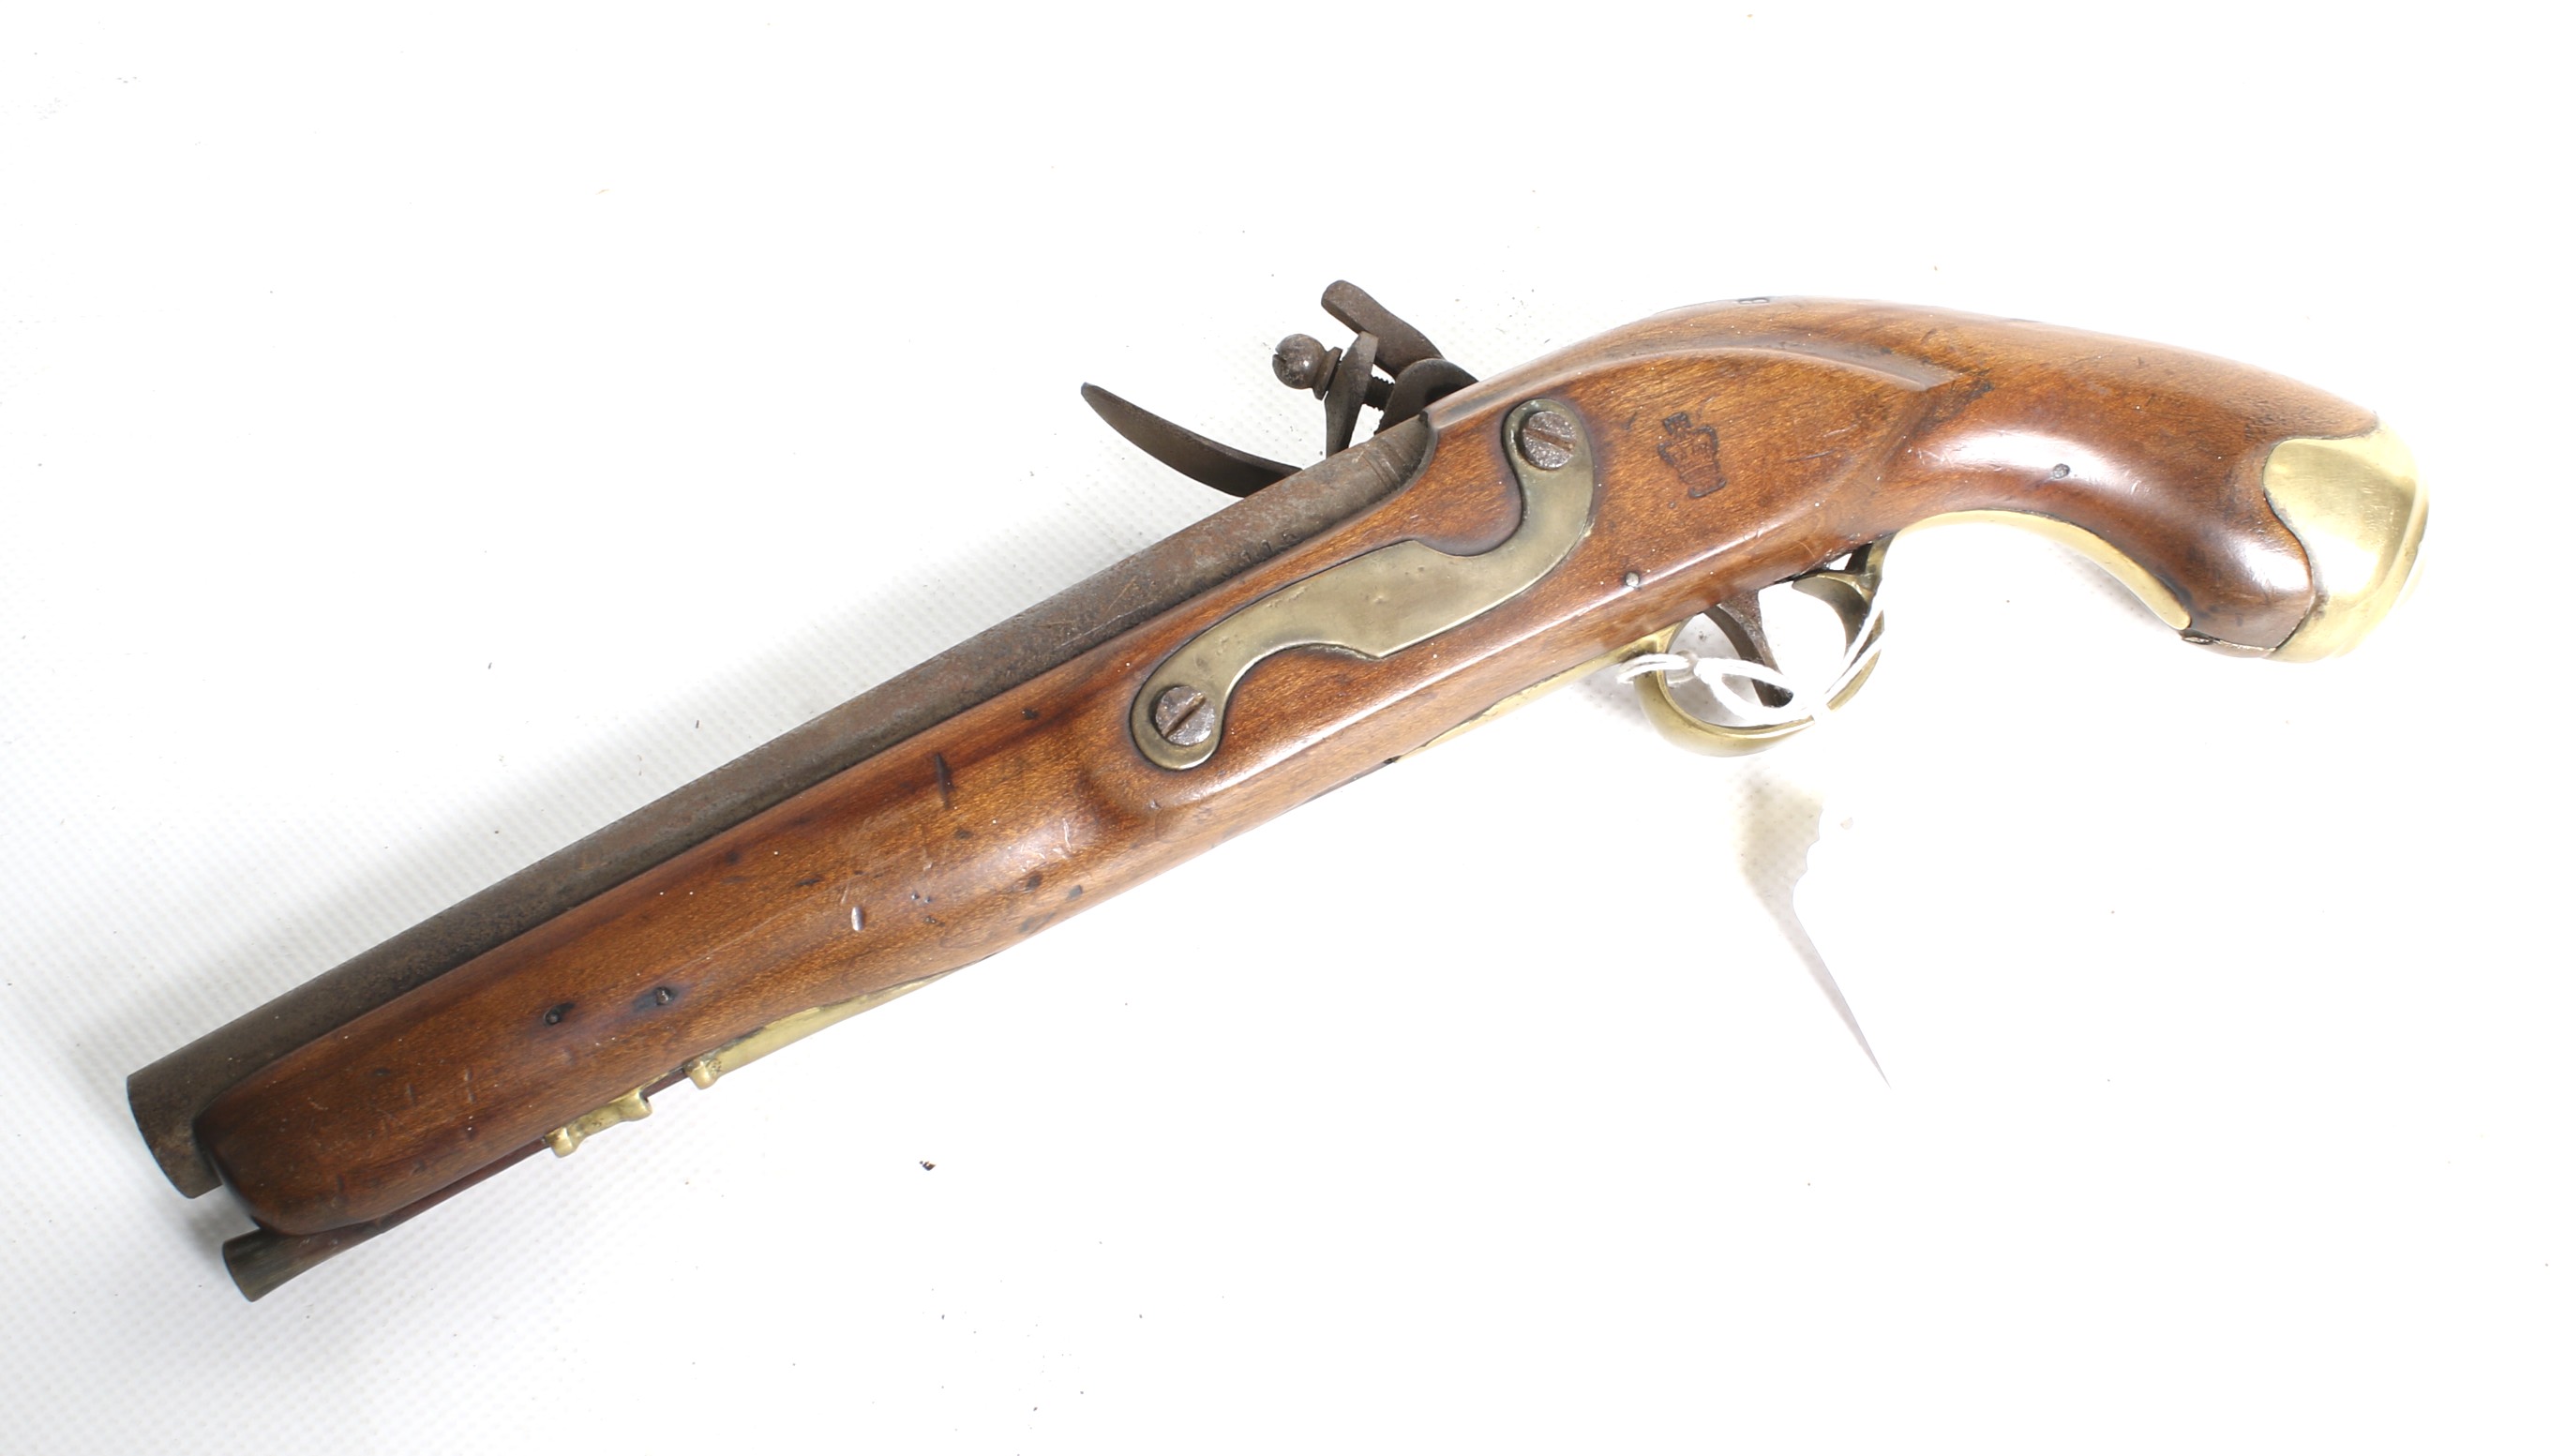 An English flintlock pistol. Circa 1740, 60 calibre, complete with loading rod. - Image 2 of 3